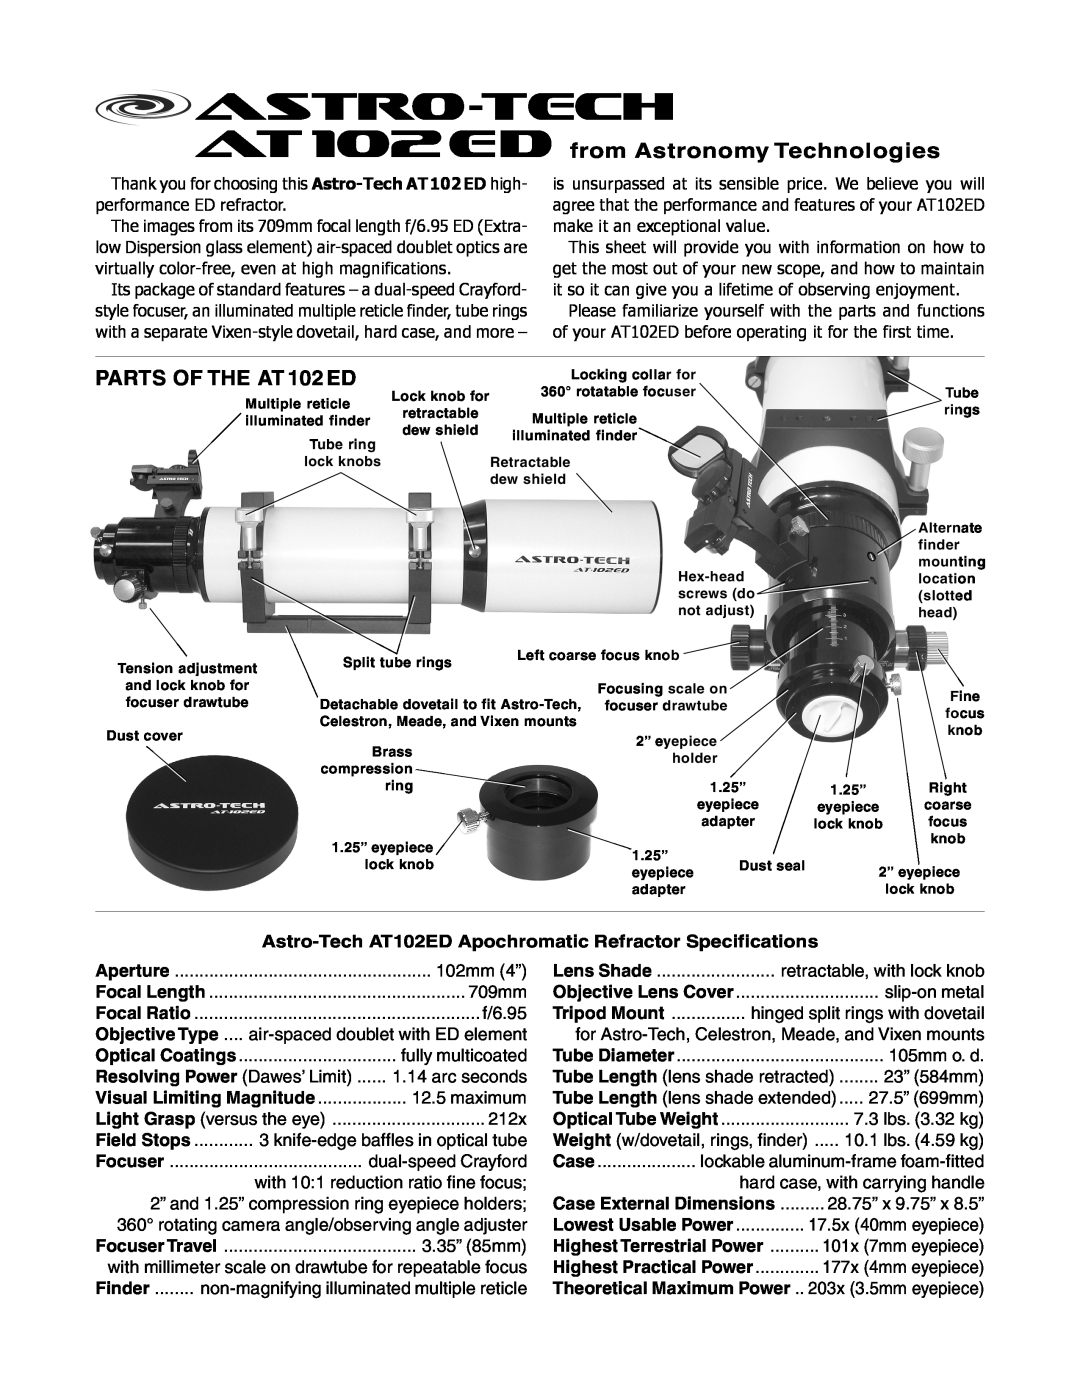 Meade specifications Astro-Tech AT102ED Apochromatic Refractor Specifications, Objective Type, astro-tech 